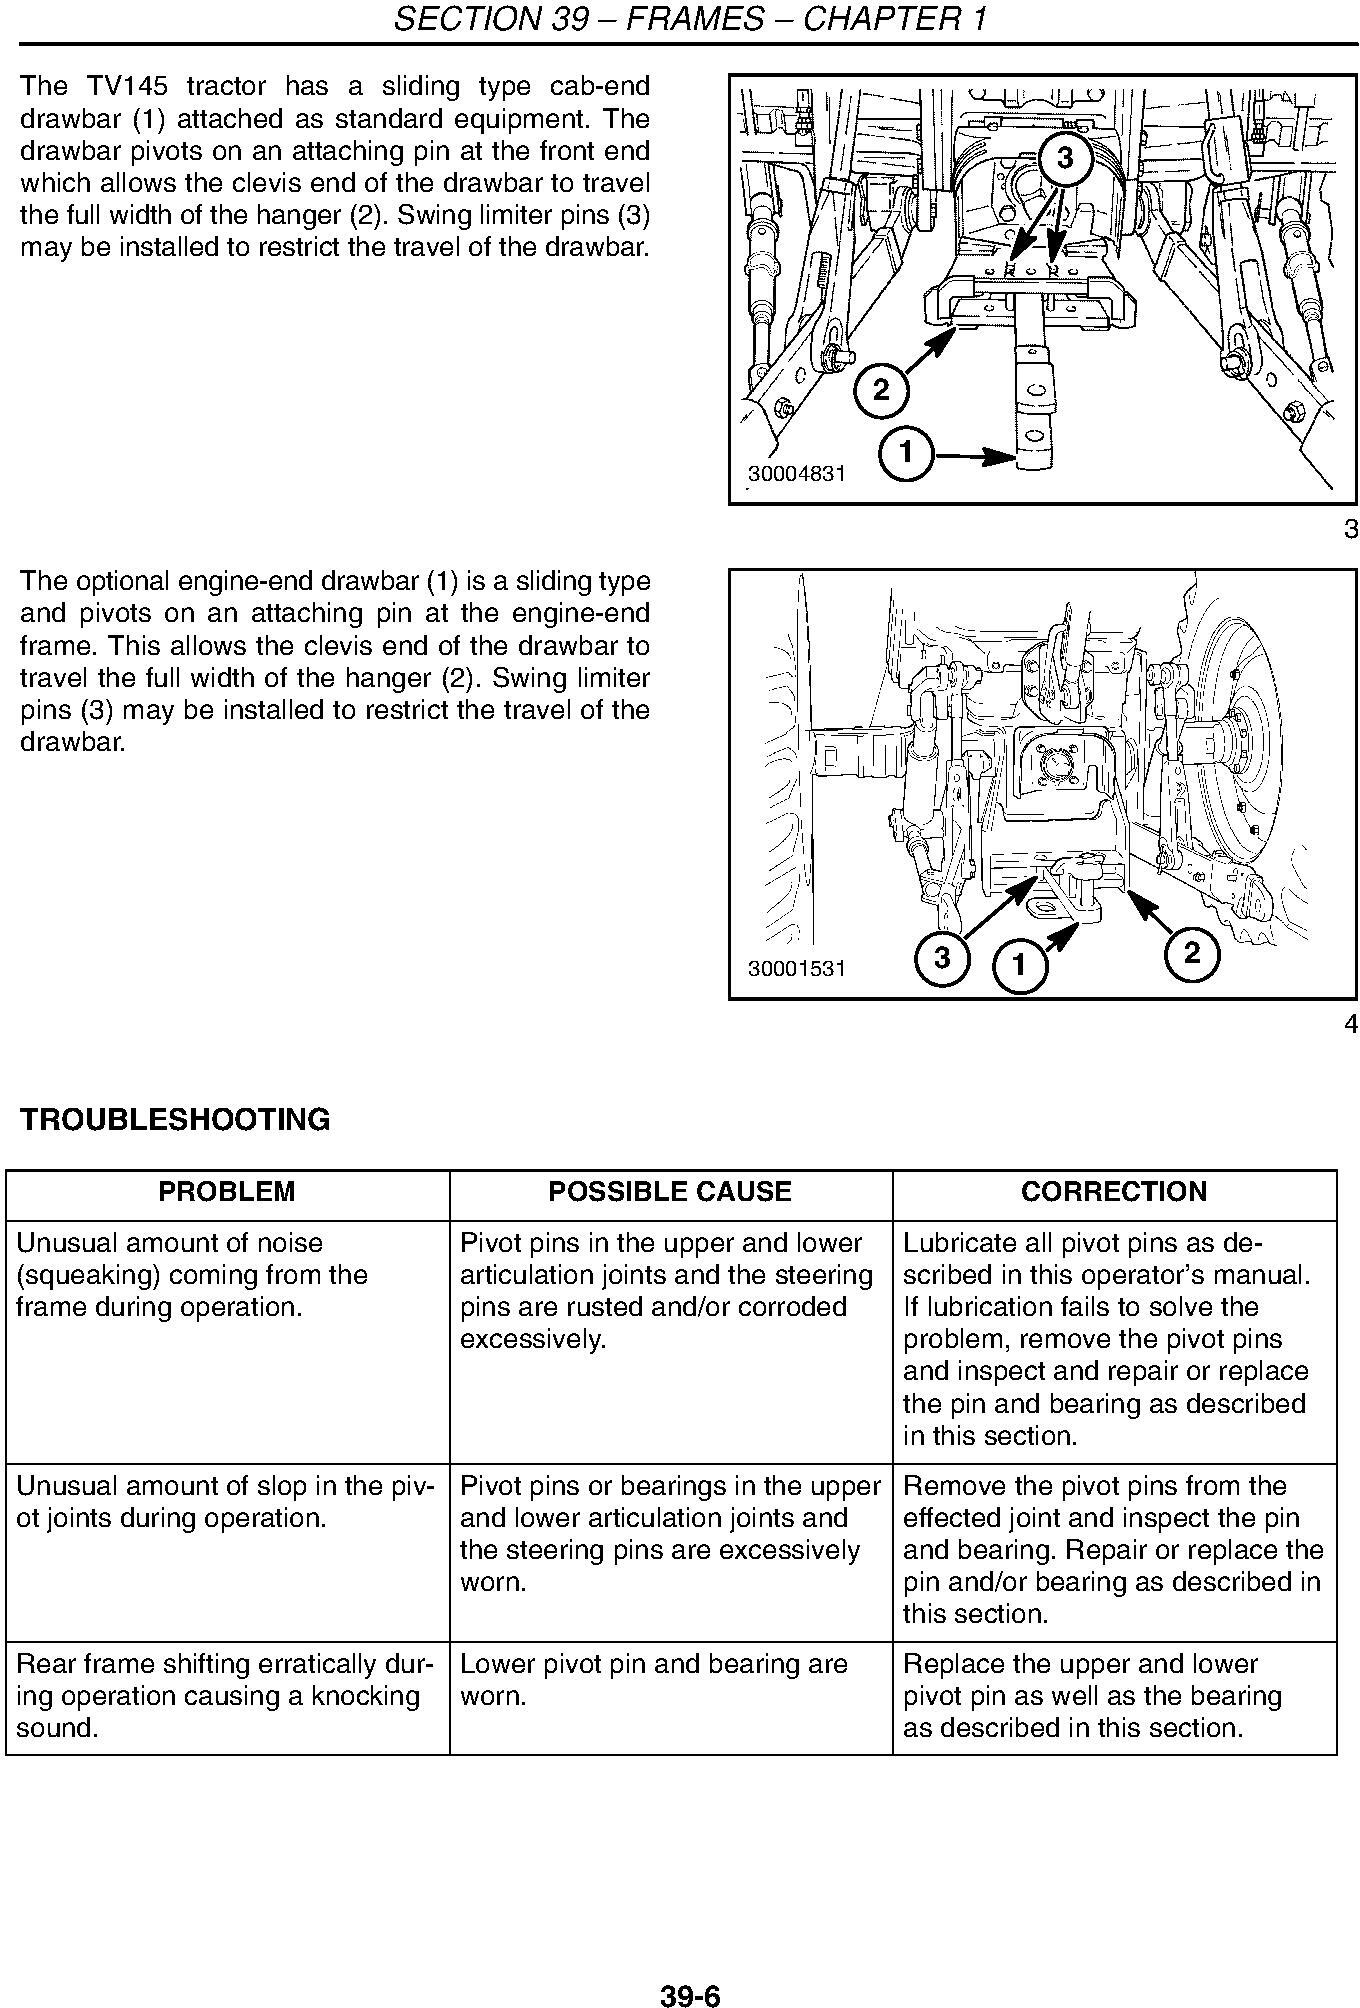 New Holland TV145 Tractor Complete Service Manual - 2